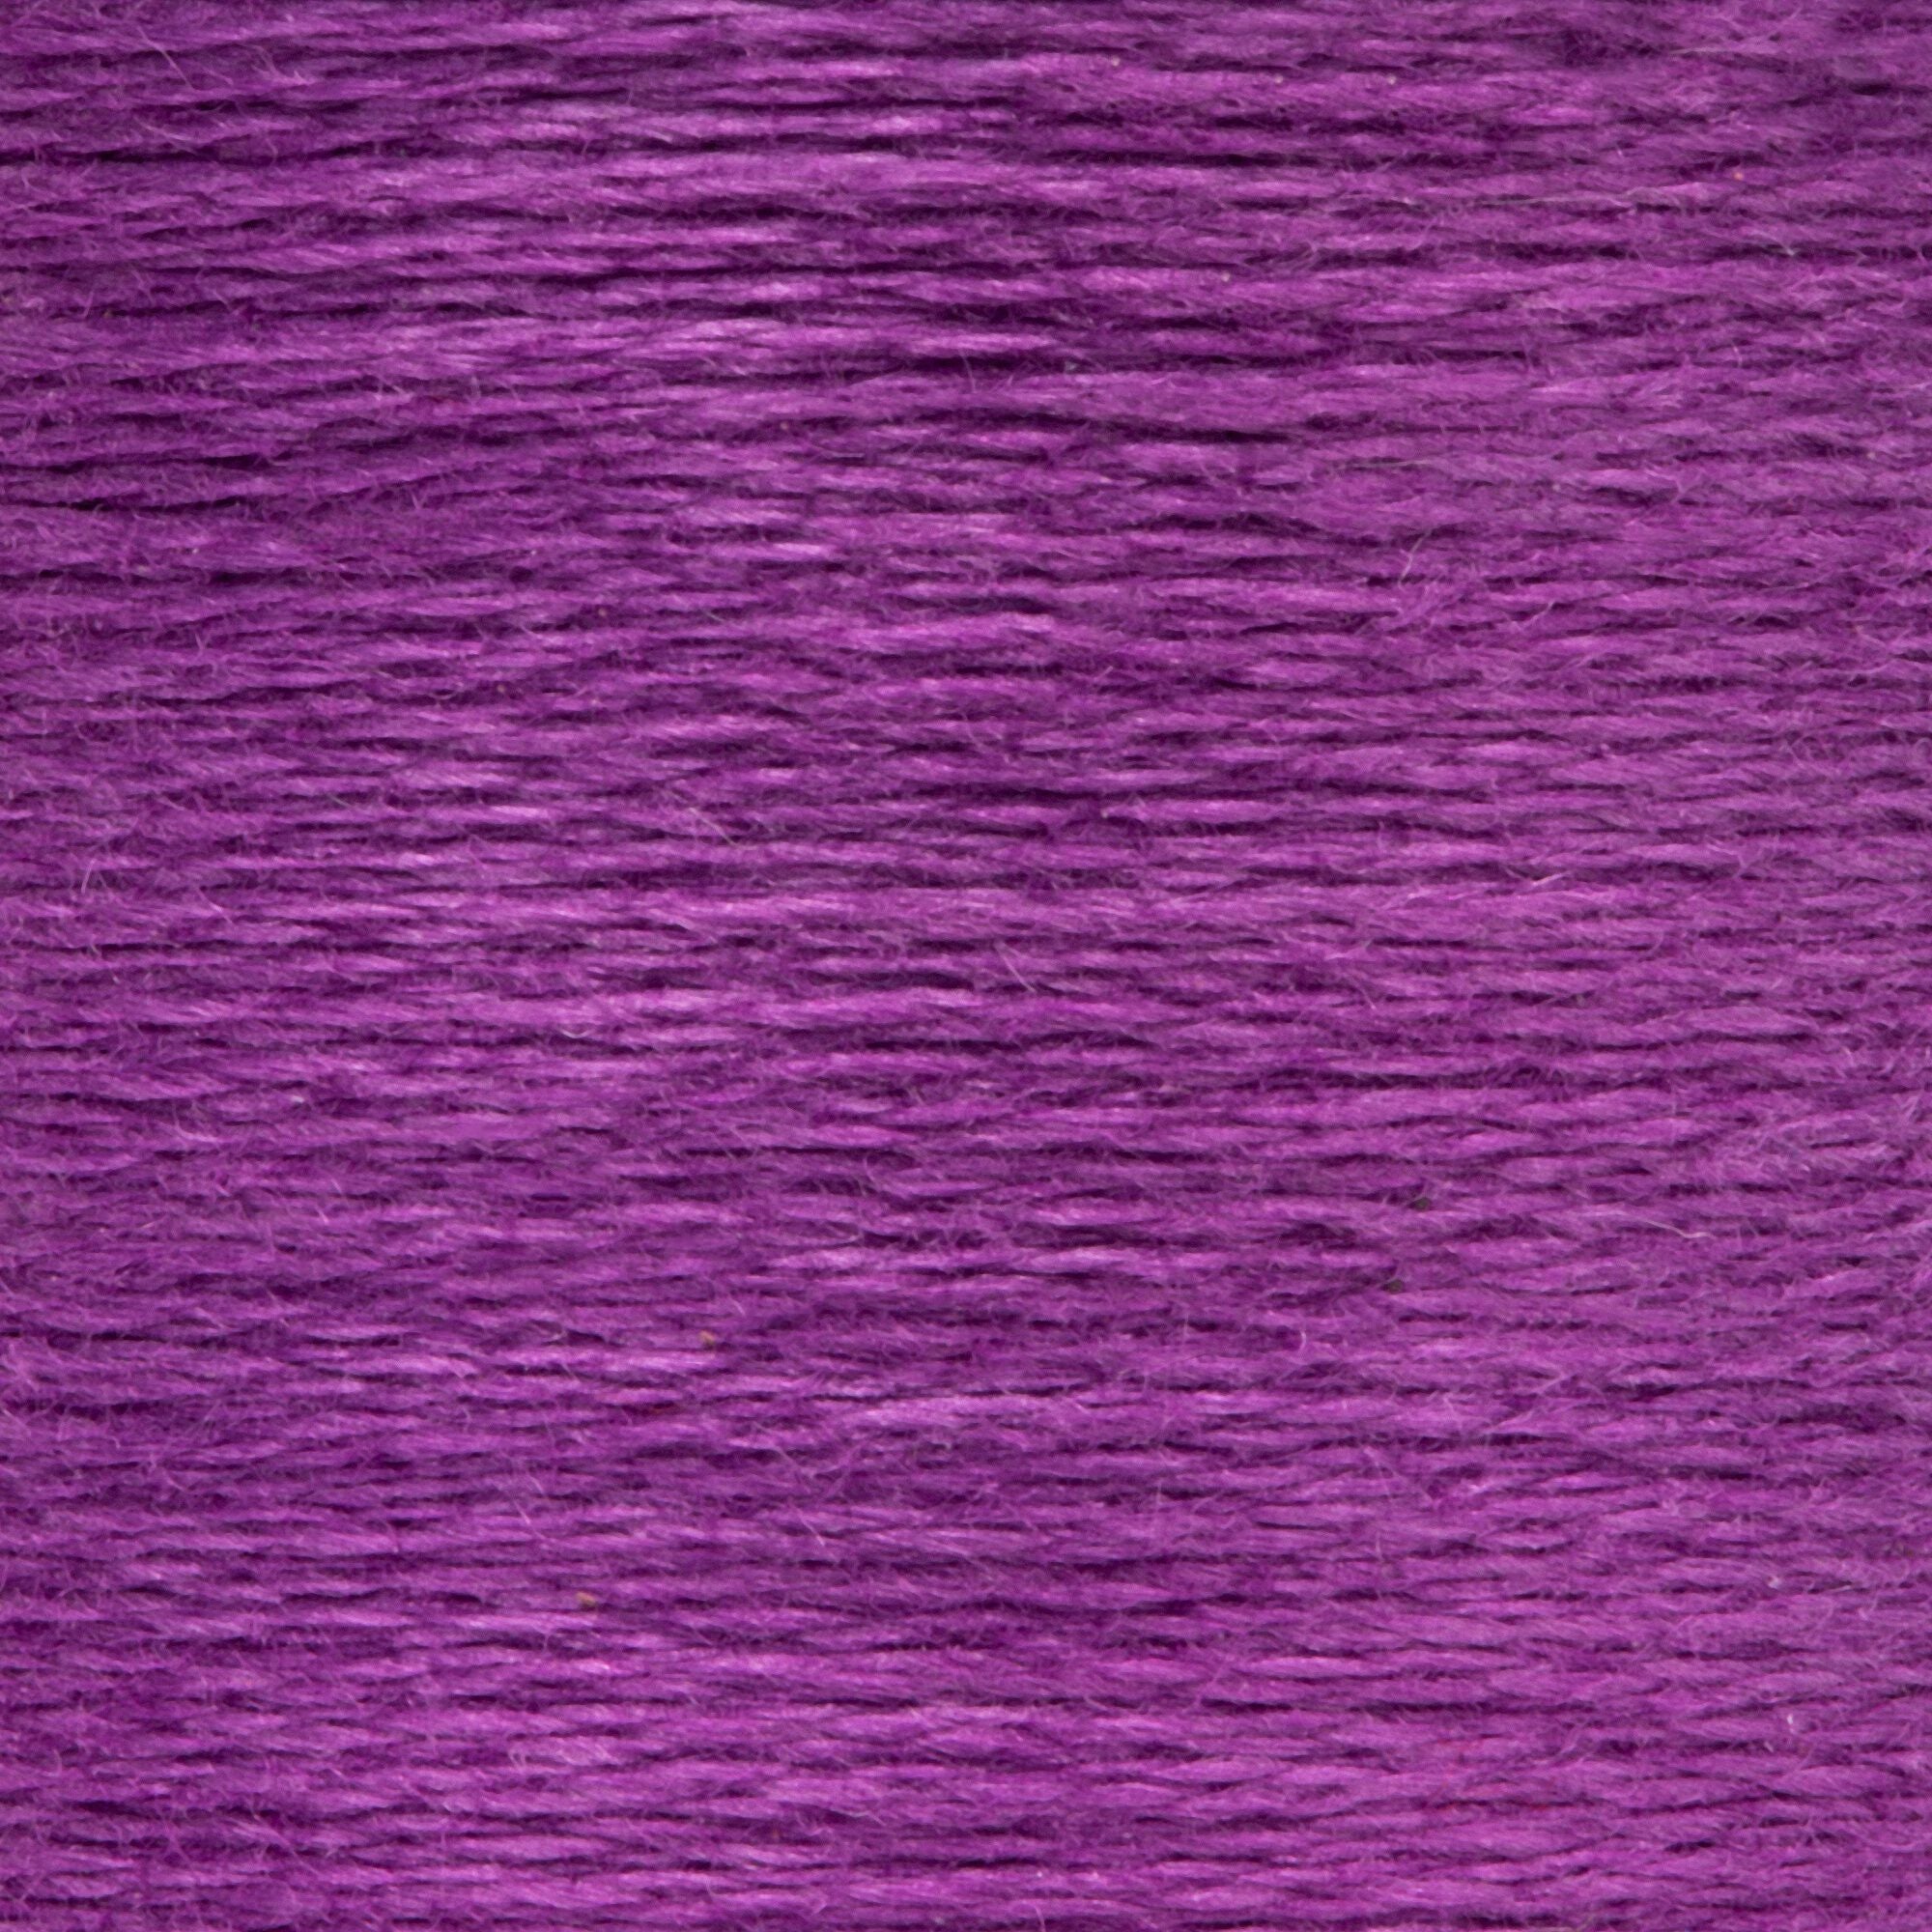 Anchor Embroidery Floss in Violet Med Dk